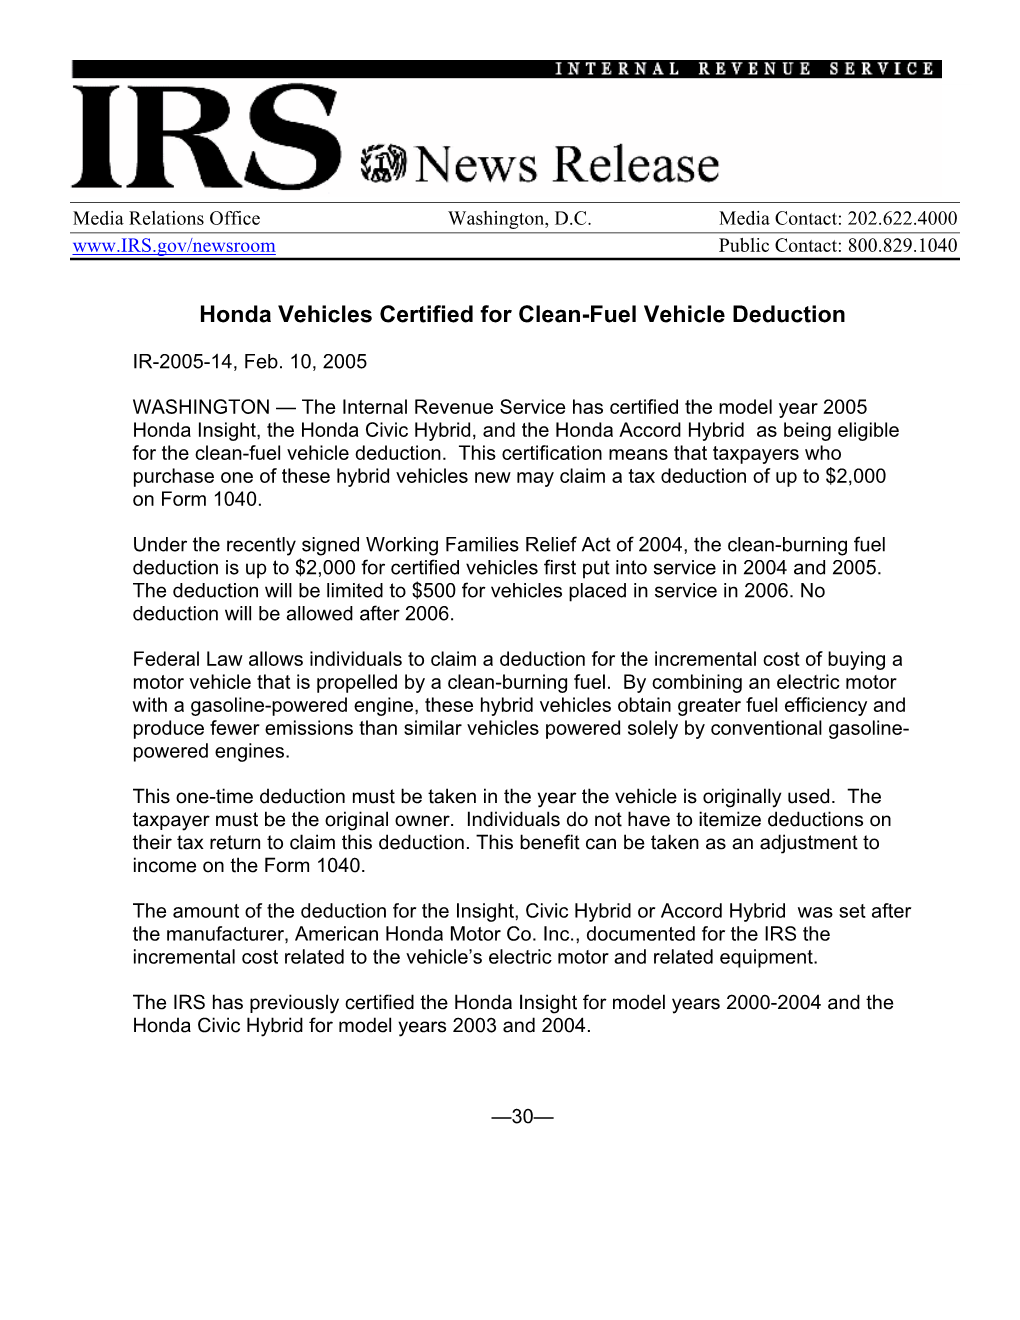 Honda Vehicles Certified for Clean-Fuel Vehicle Deduction